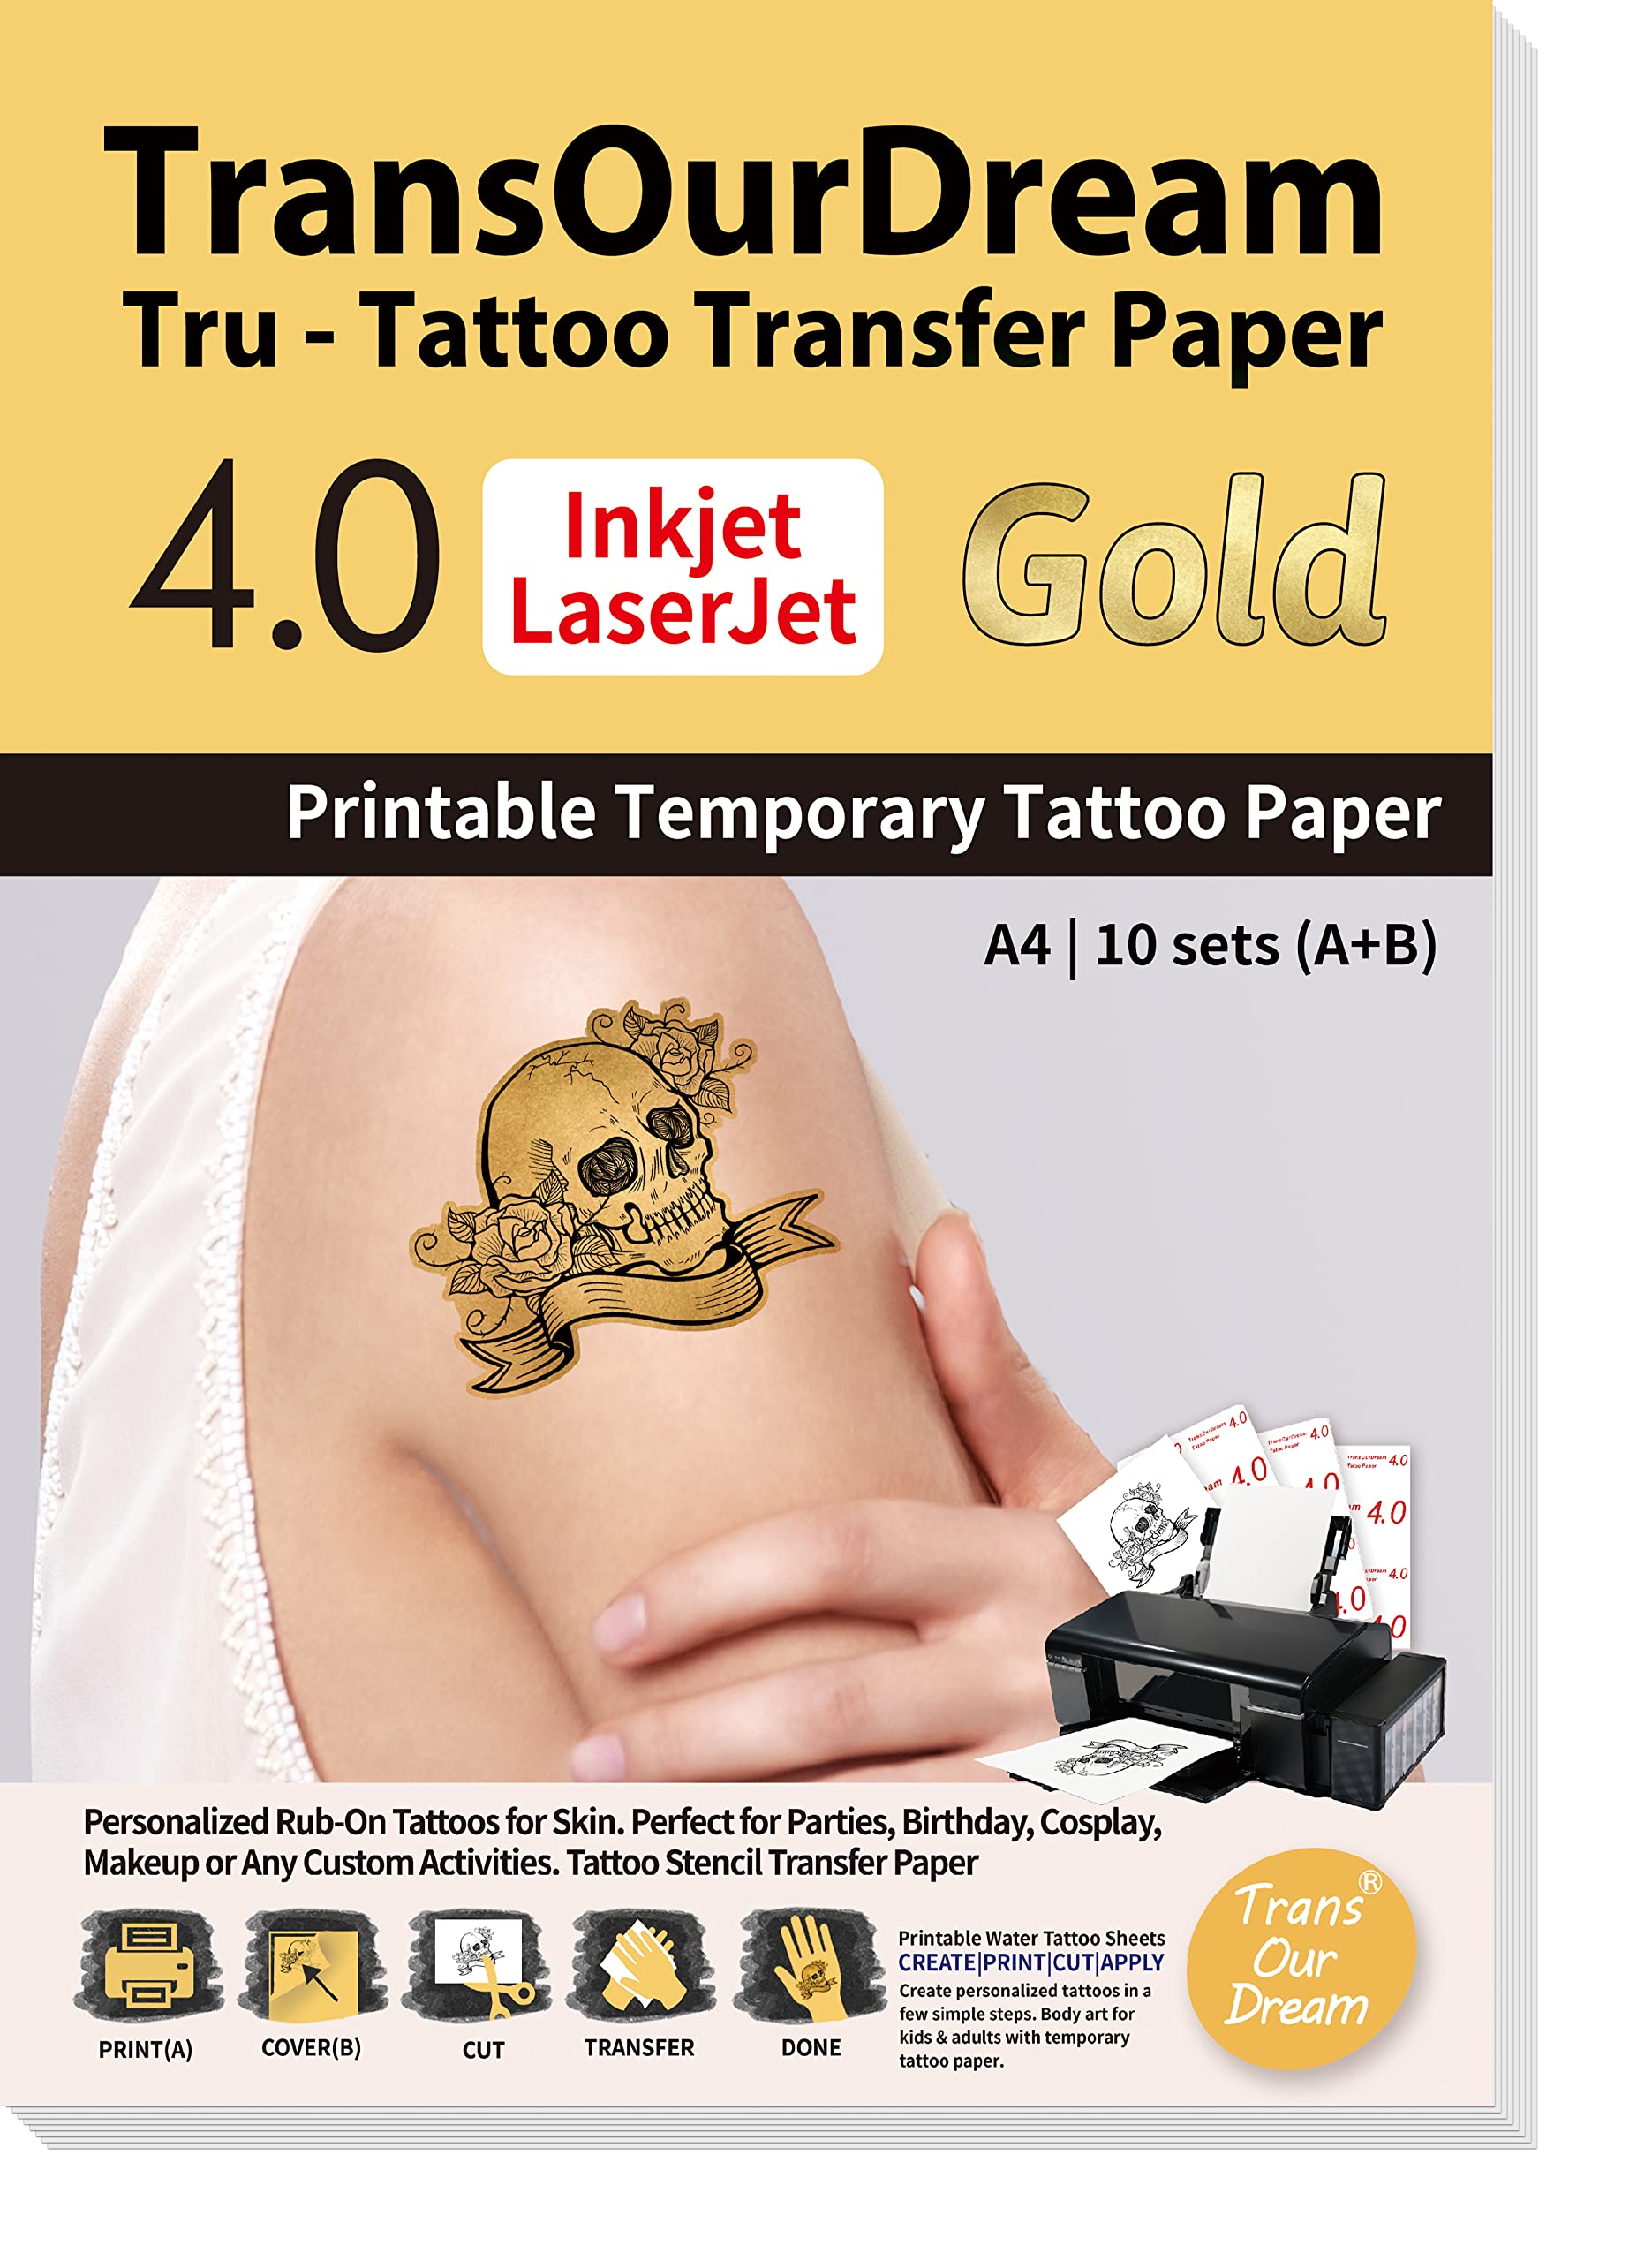 TransOurDream Gold Printable Temporary Tattoo Transfer Paper for